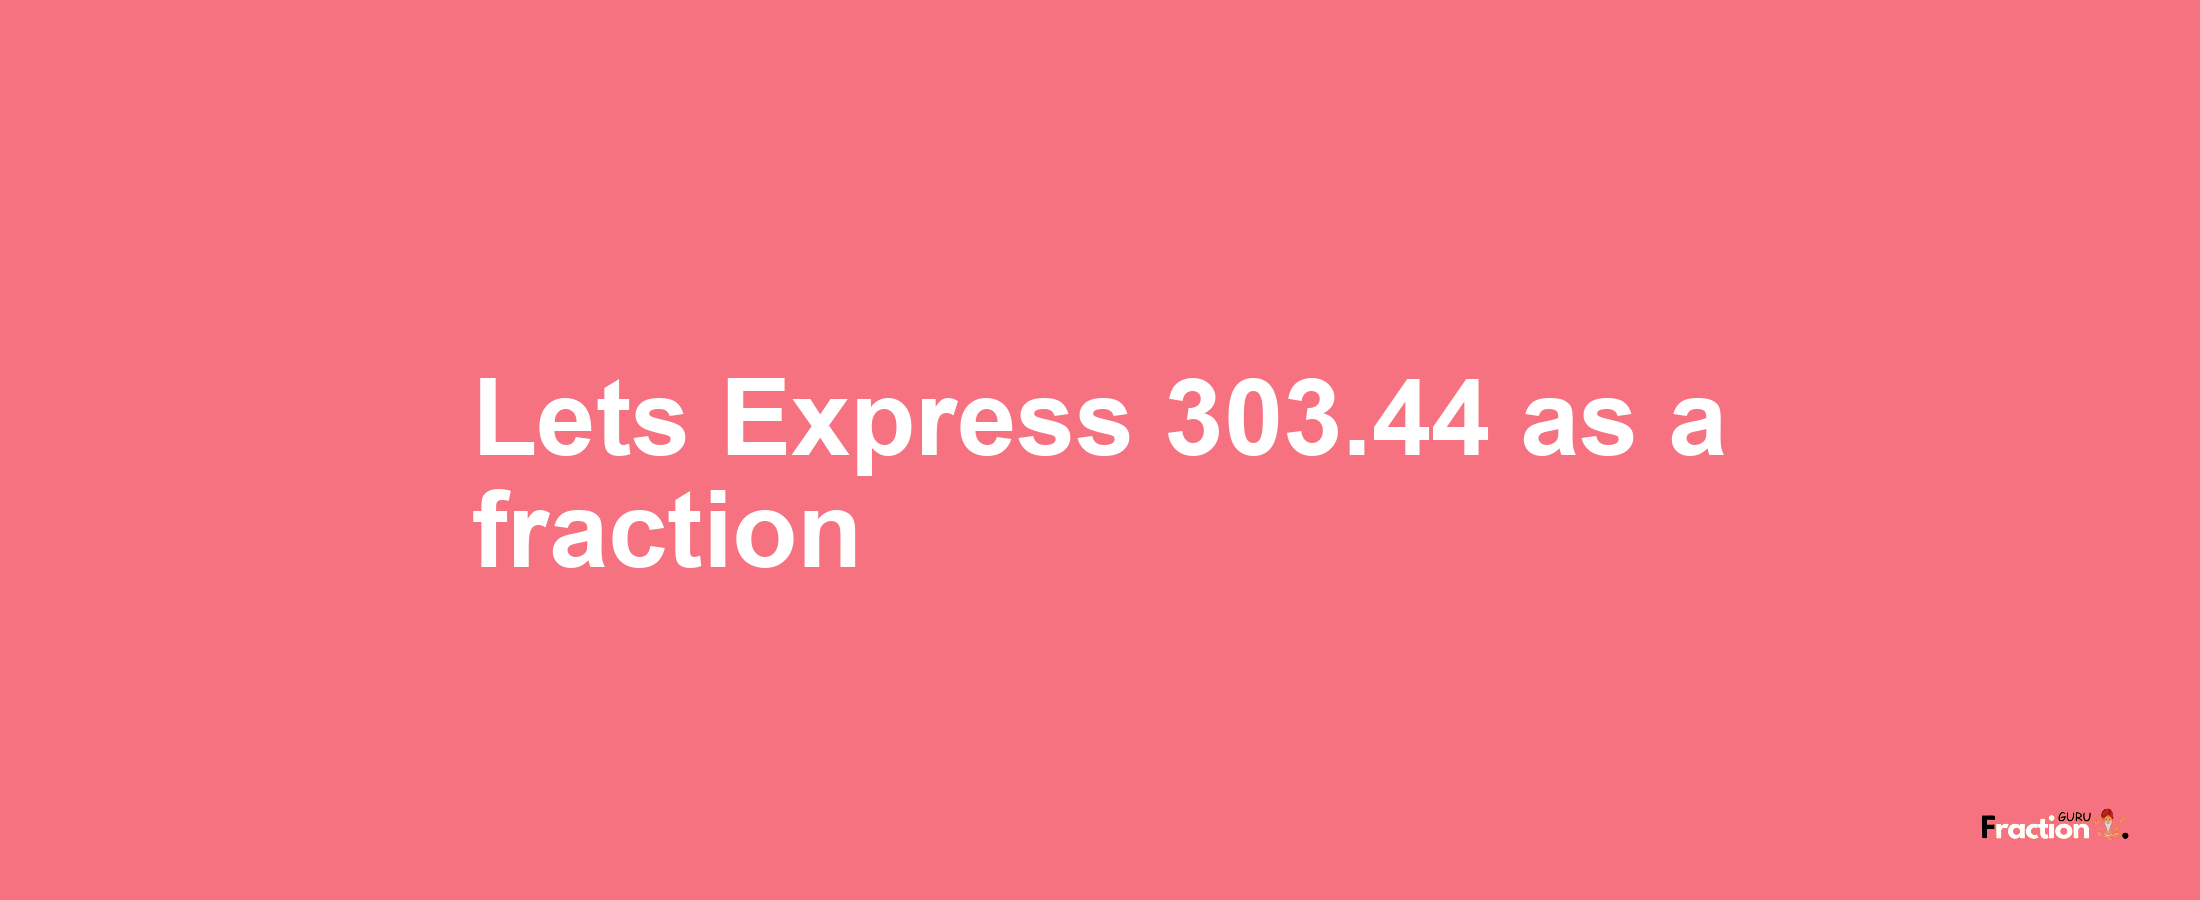 Lets Express 303.44 as afraction